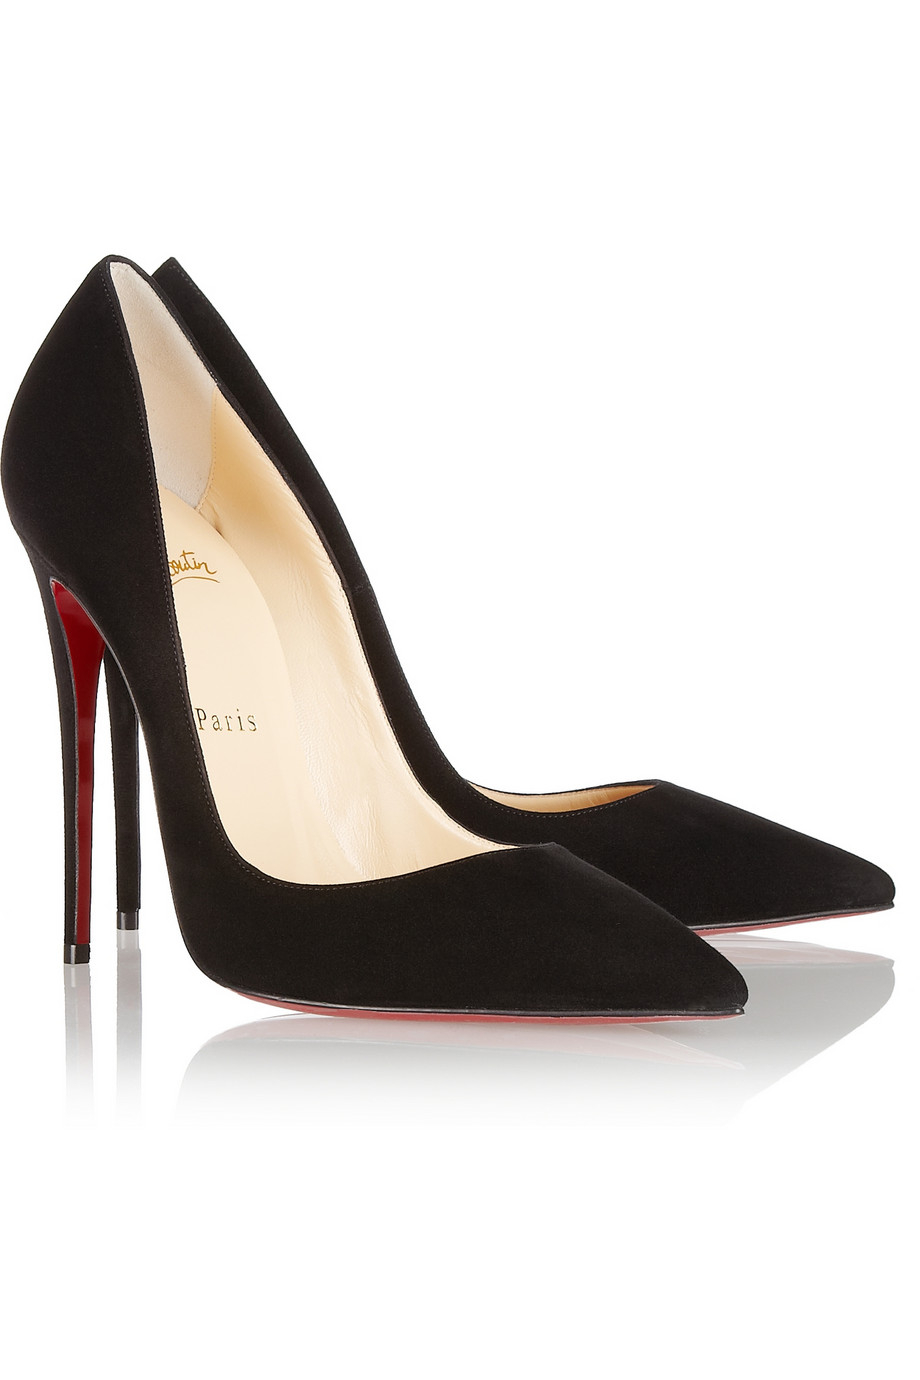 Christian Louboutin So Kate 120 Suede Pumps in Black - Lyst